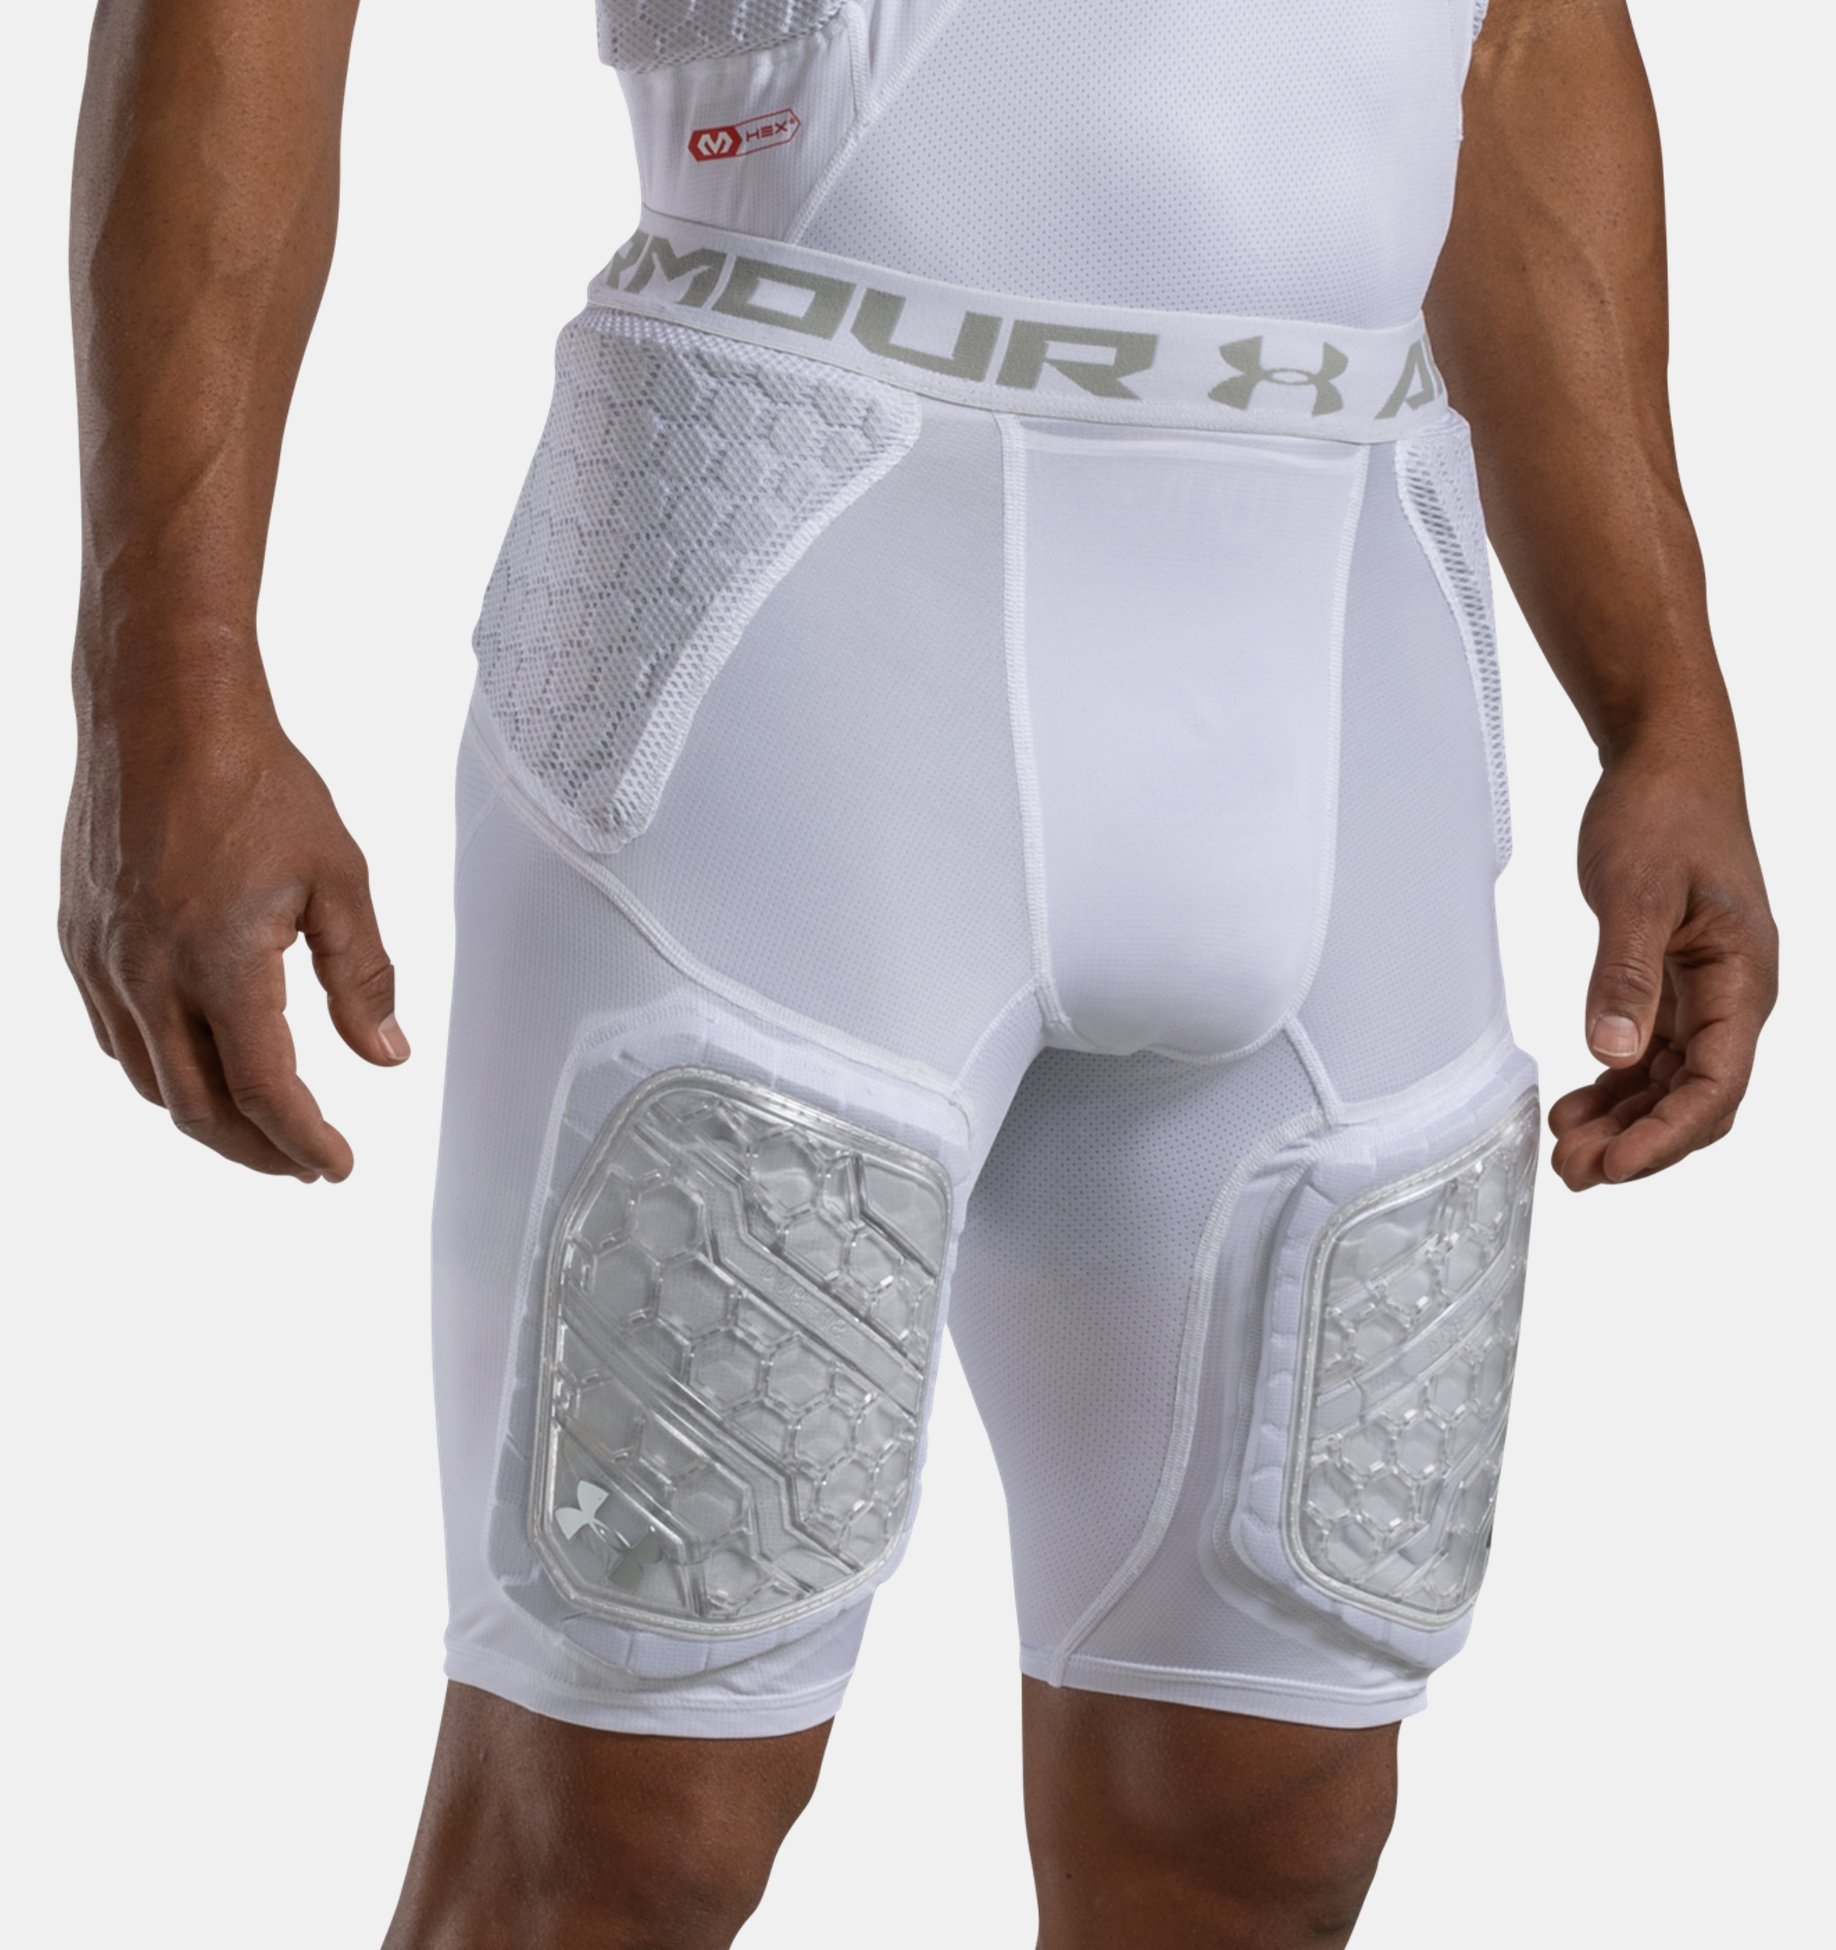 Under Armour Gameday Pro 5-Pad Football Compression Girdle Shorts w/out Hardcap Football Padded Shorts Youth & Adult sizes 